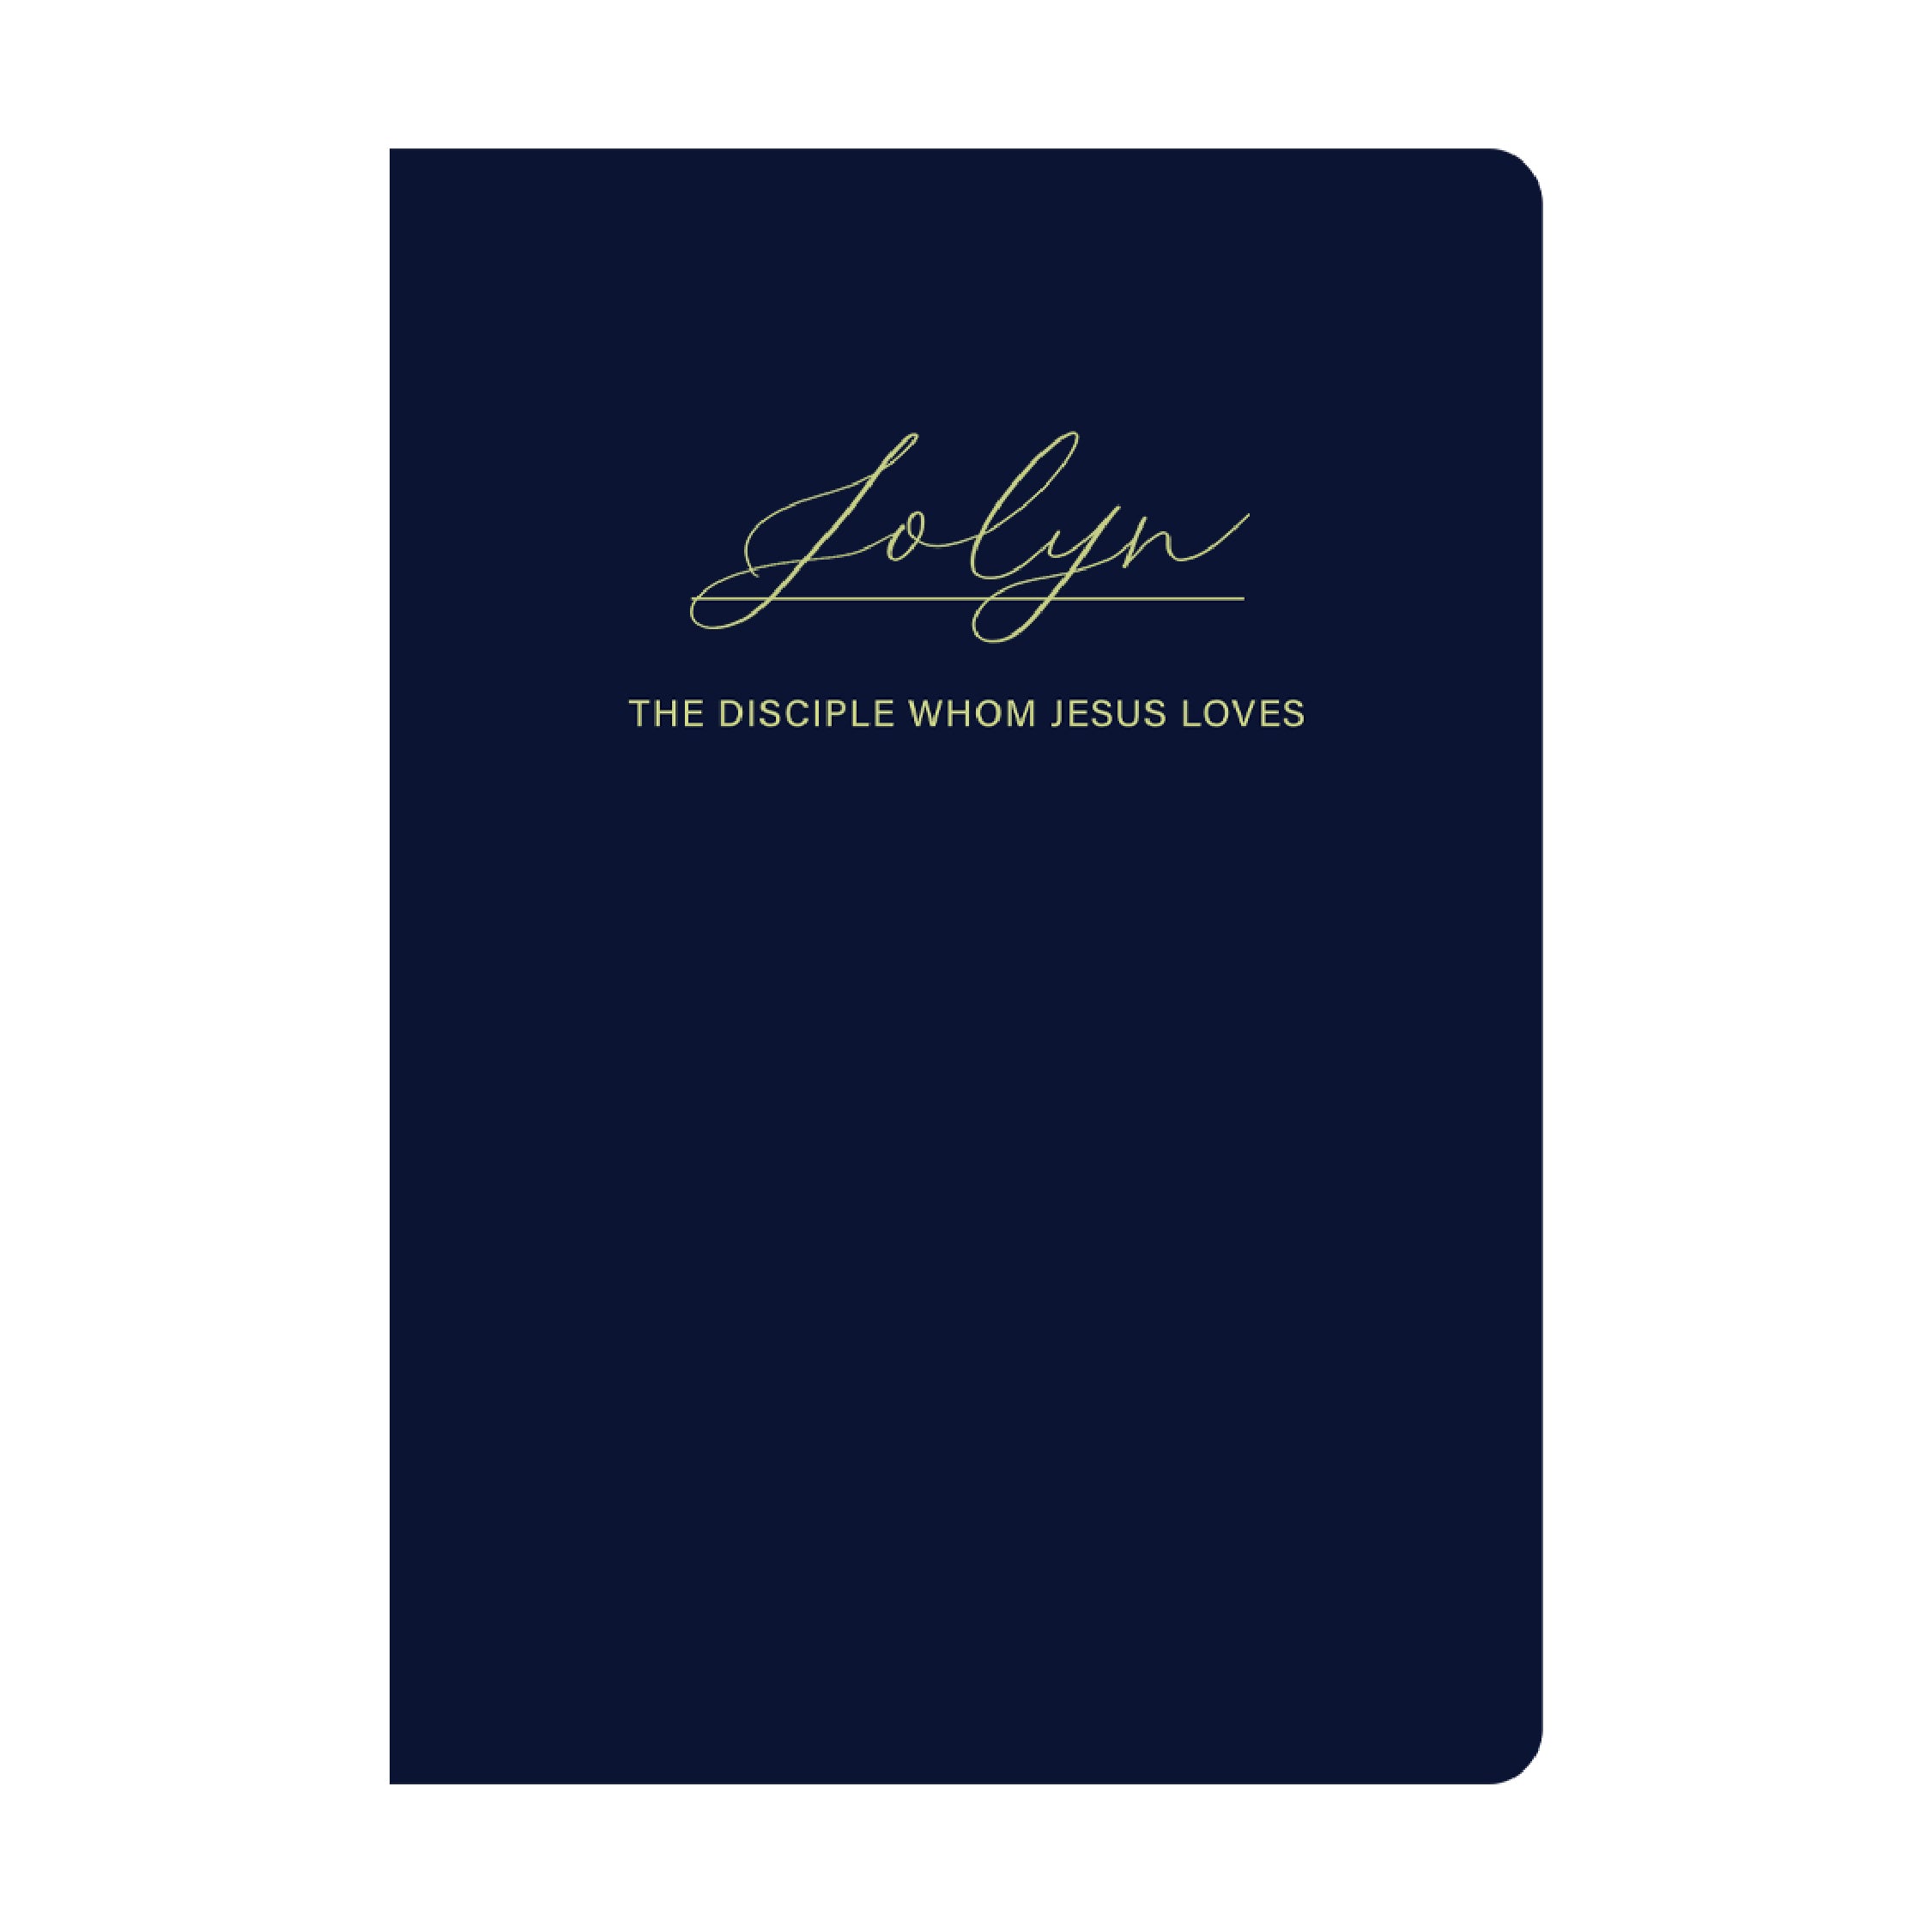 Customisable Christian Gift: Personalisable Christian Notebook | Custom Name A5 Leather Journal in Navy Blue and Gold